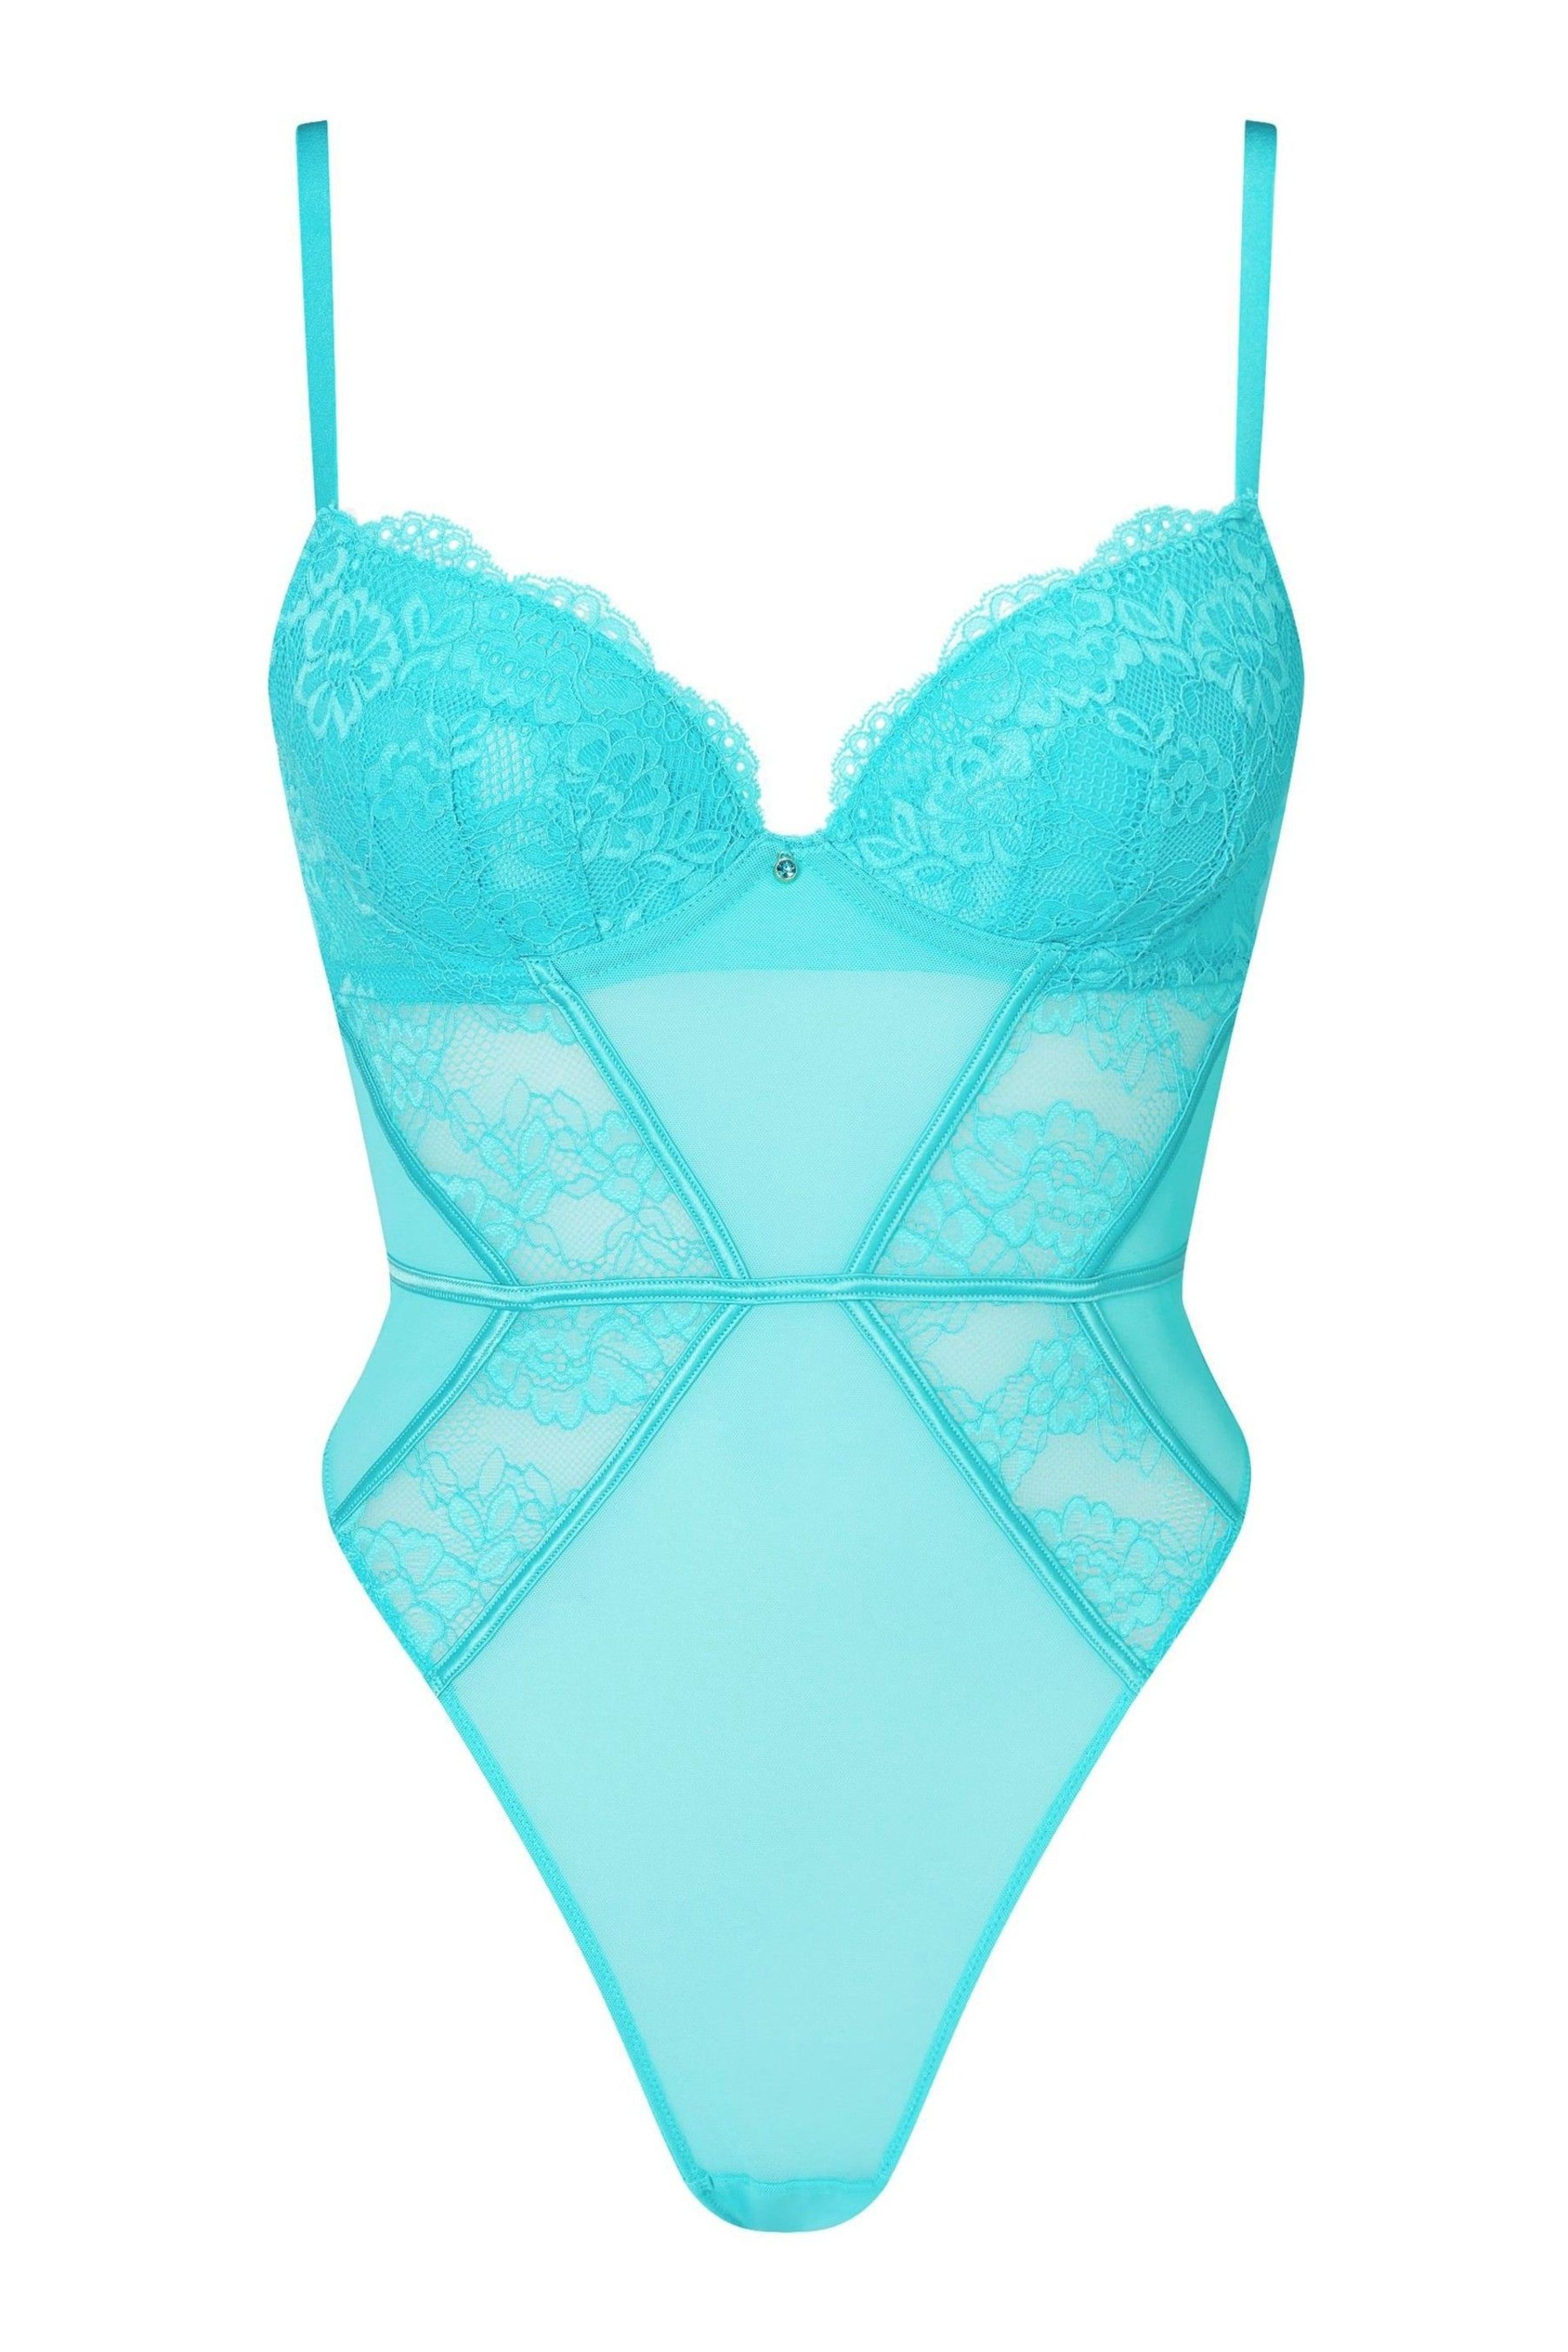 Ann Summers Aqua Blue Sexy Lace Planet Body - Image 4 of 4